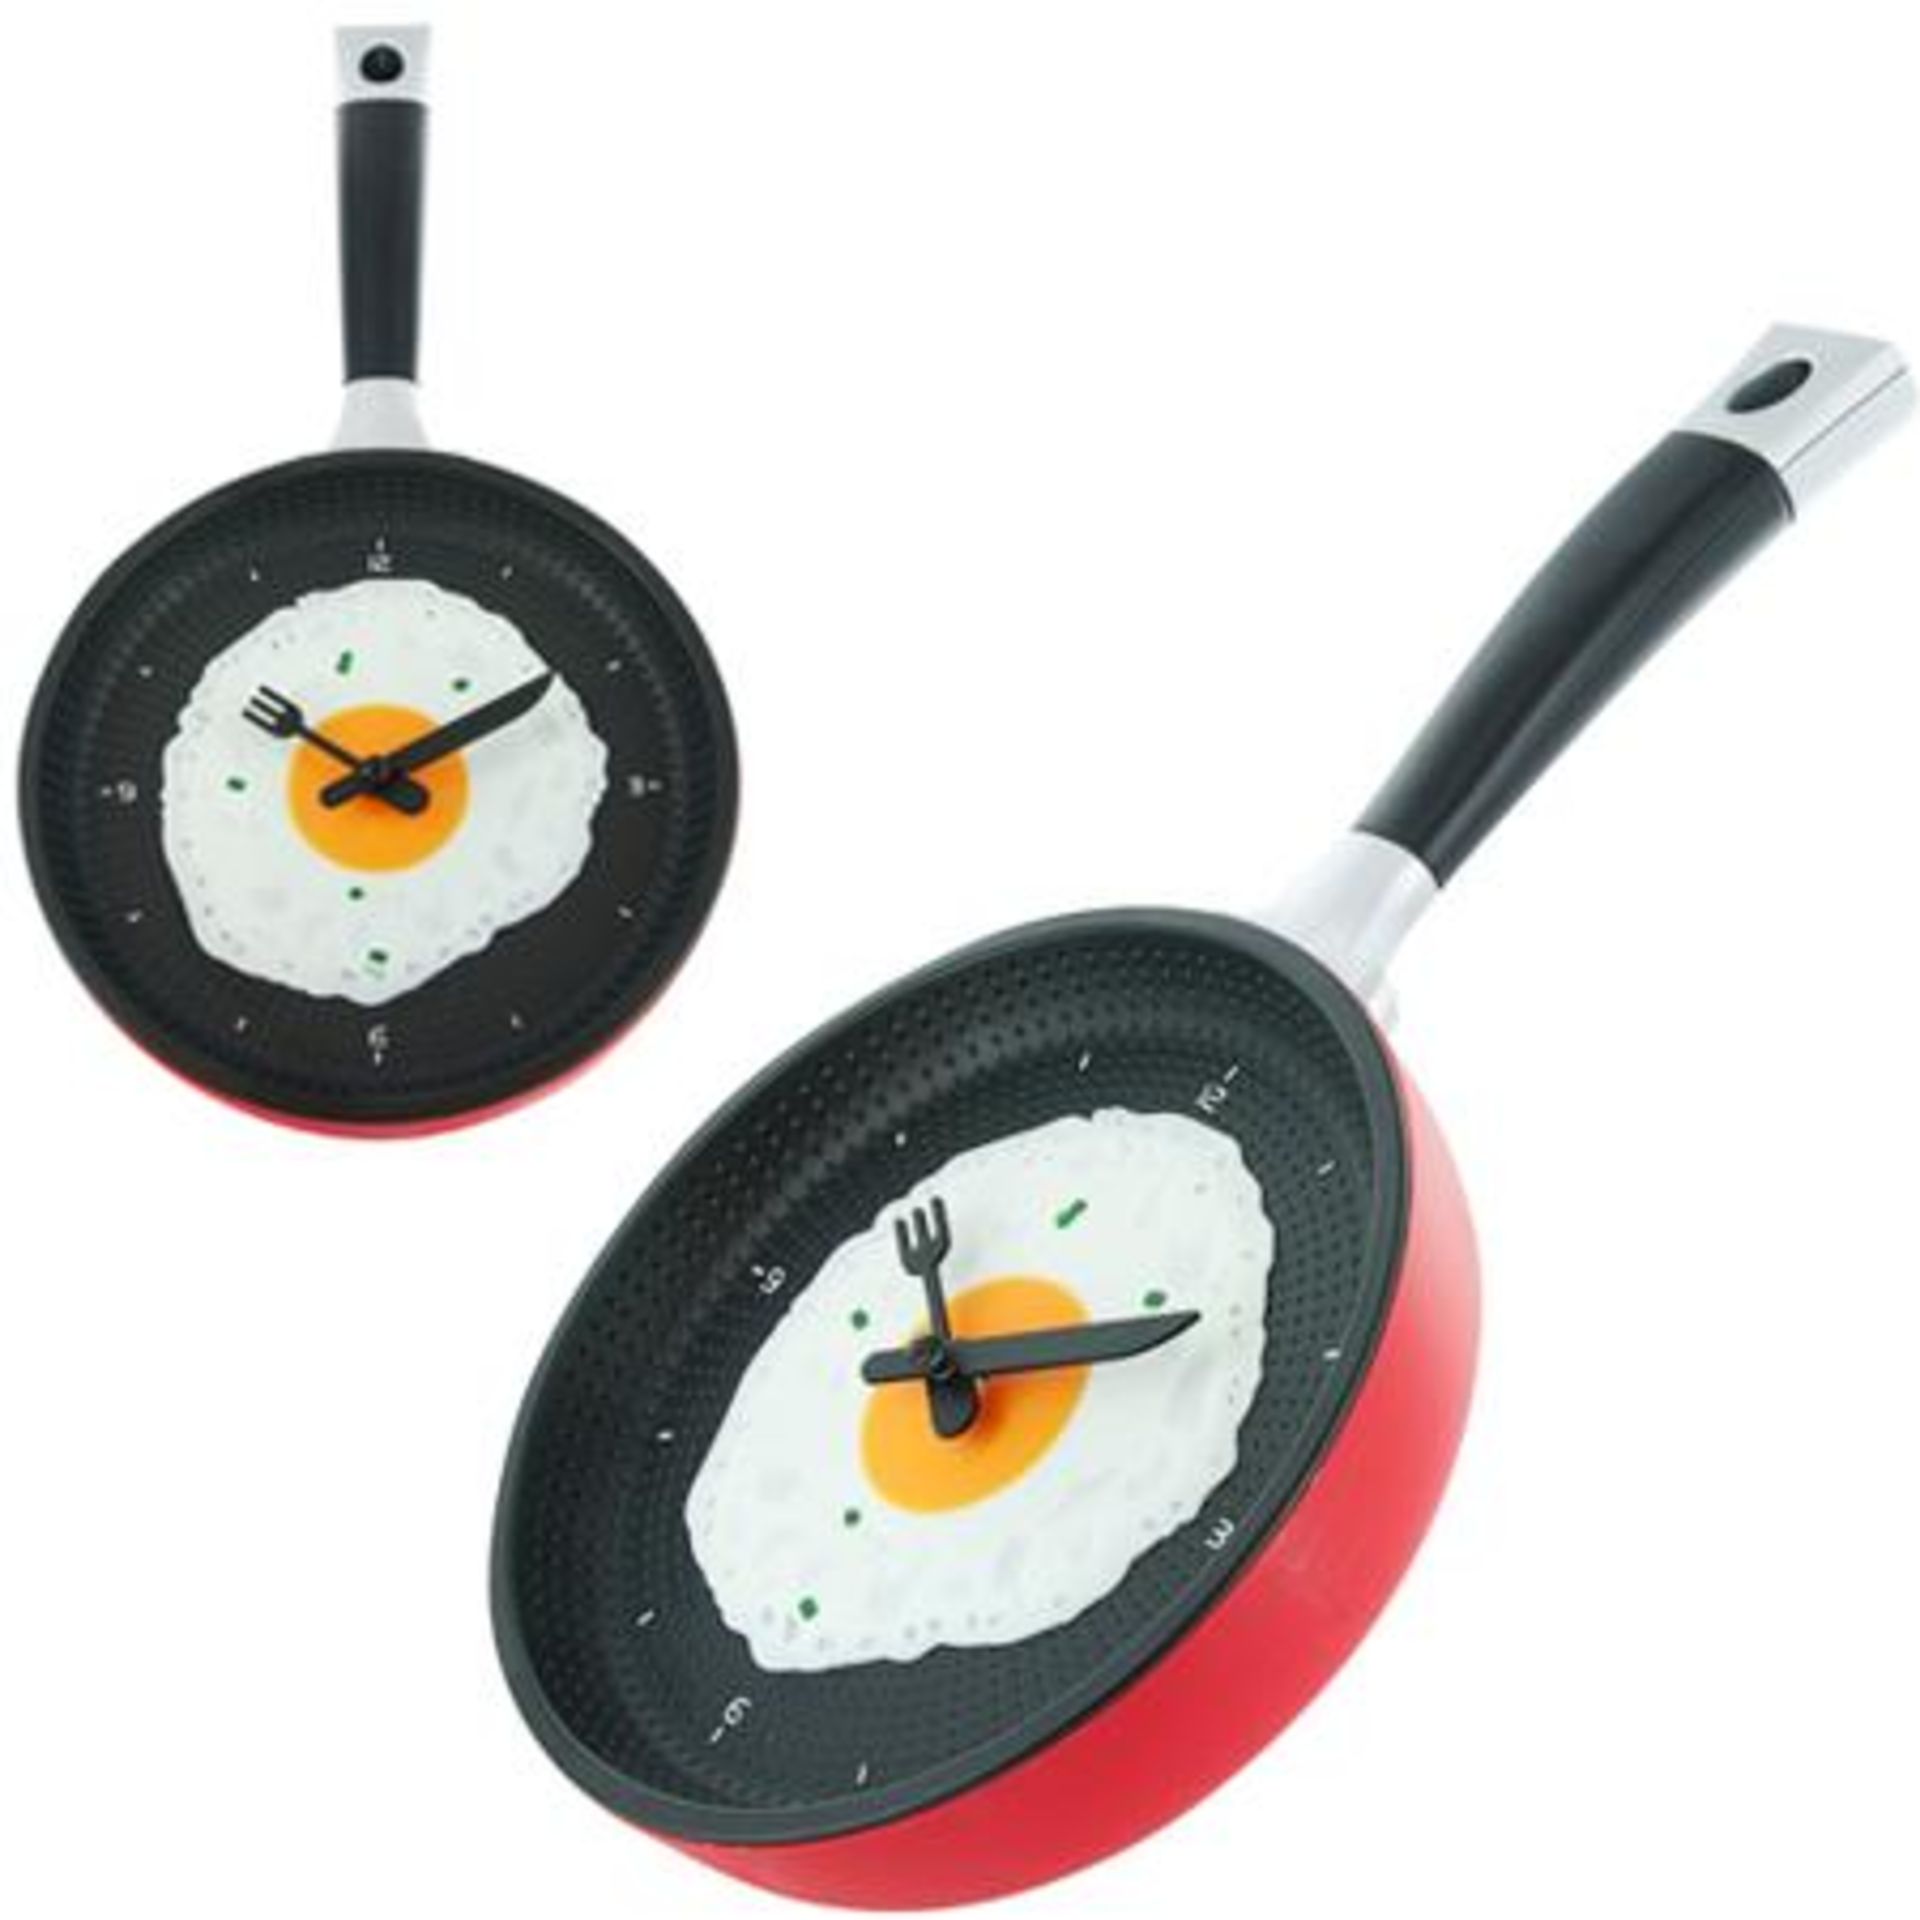 V *TRADE QTY* Brand New Frying Pan Wall Clock (Colour may vary) X 8 YOUR BID PRICE TO BE